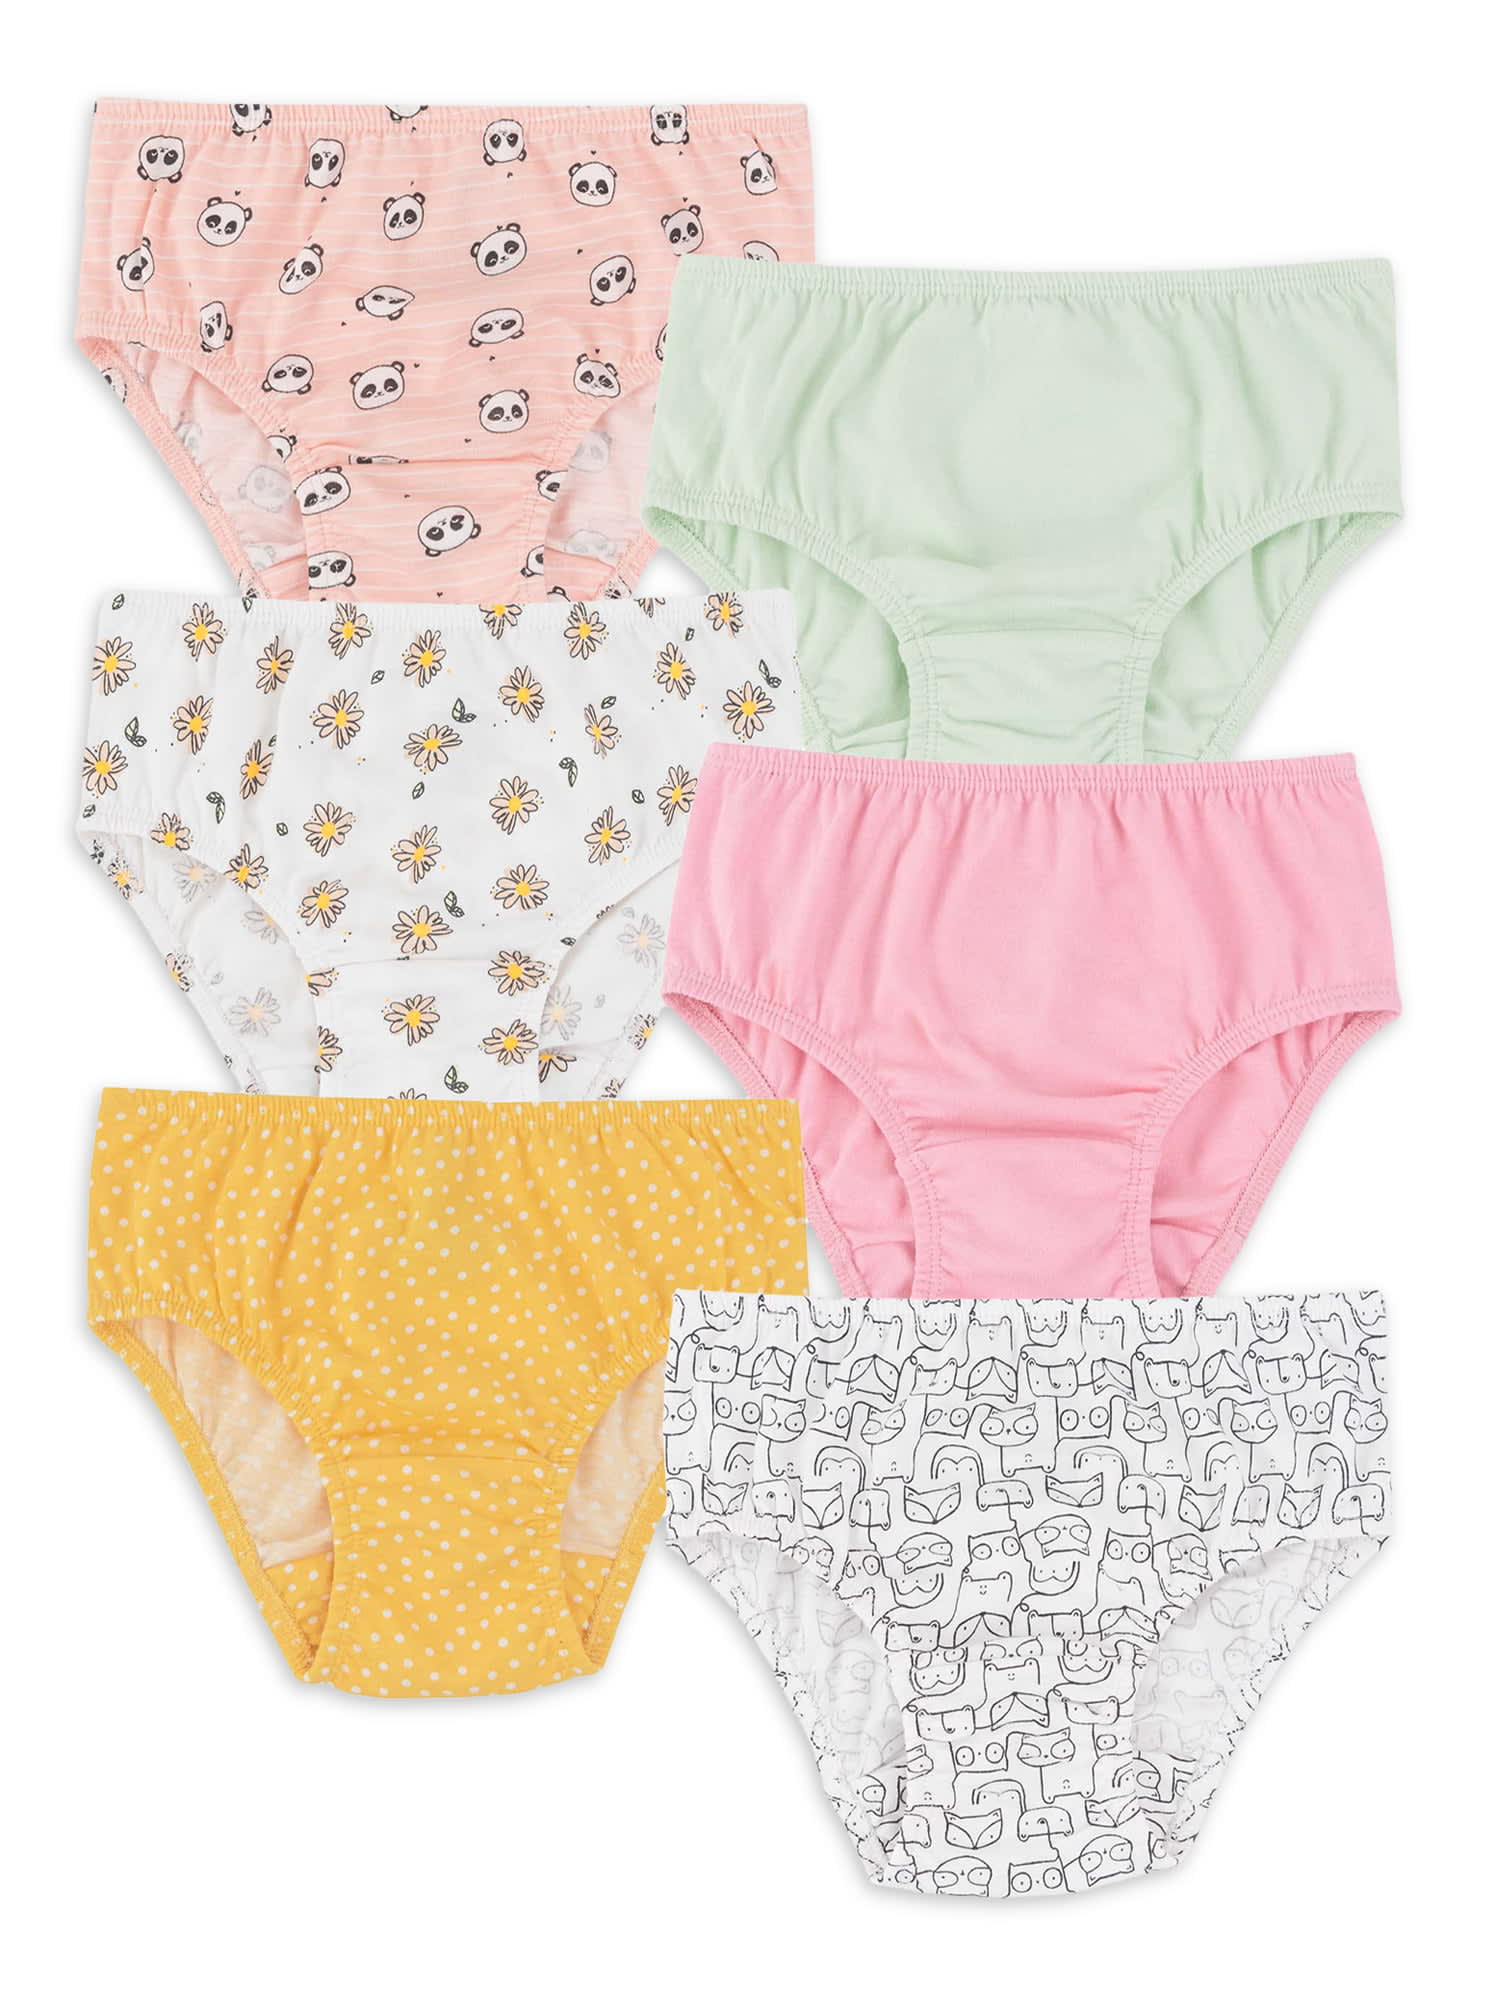 Buy Fruit of the Loom Toddler Girls 10 Pack Assorted Cotton Brief Underwear,  4T/5T, at